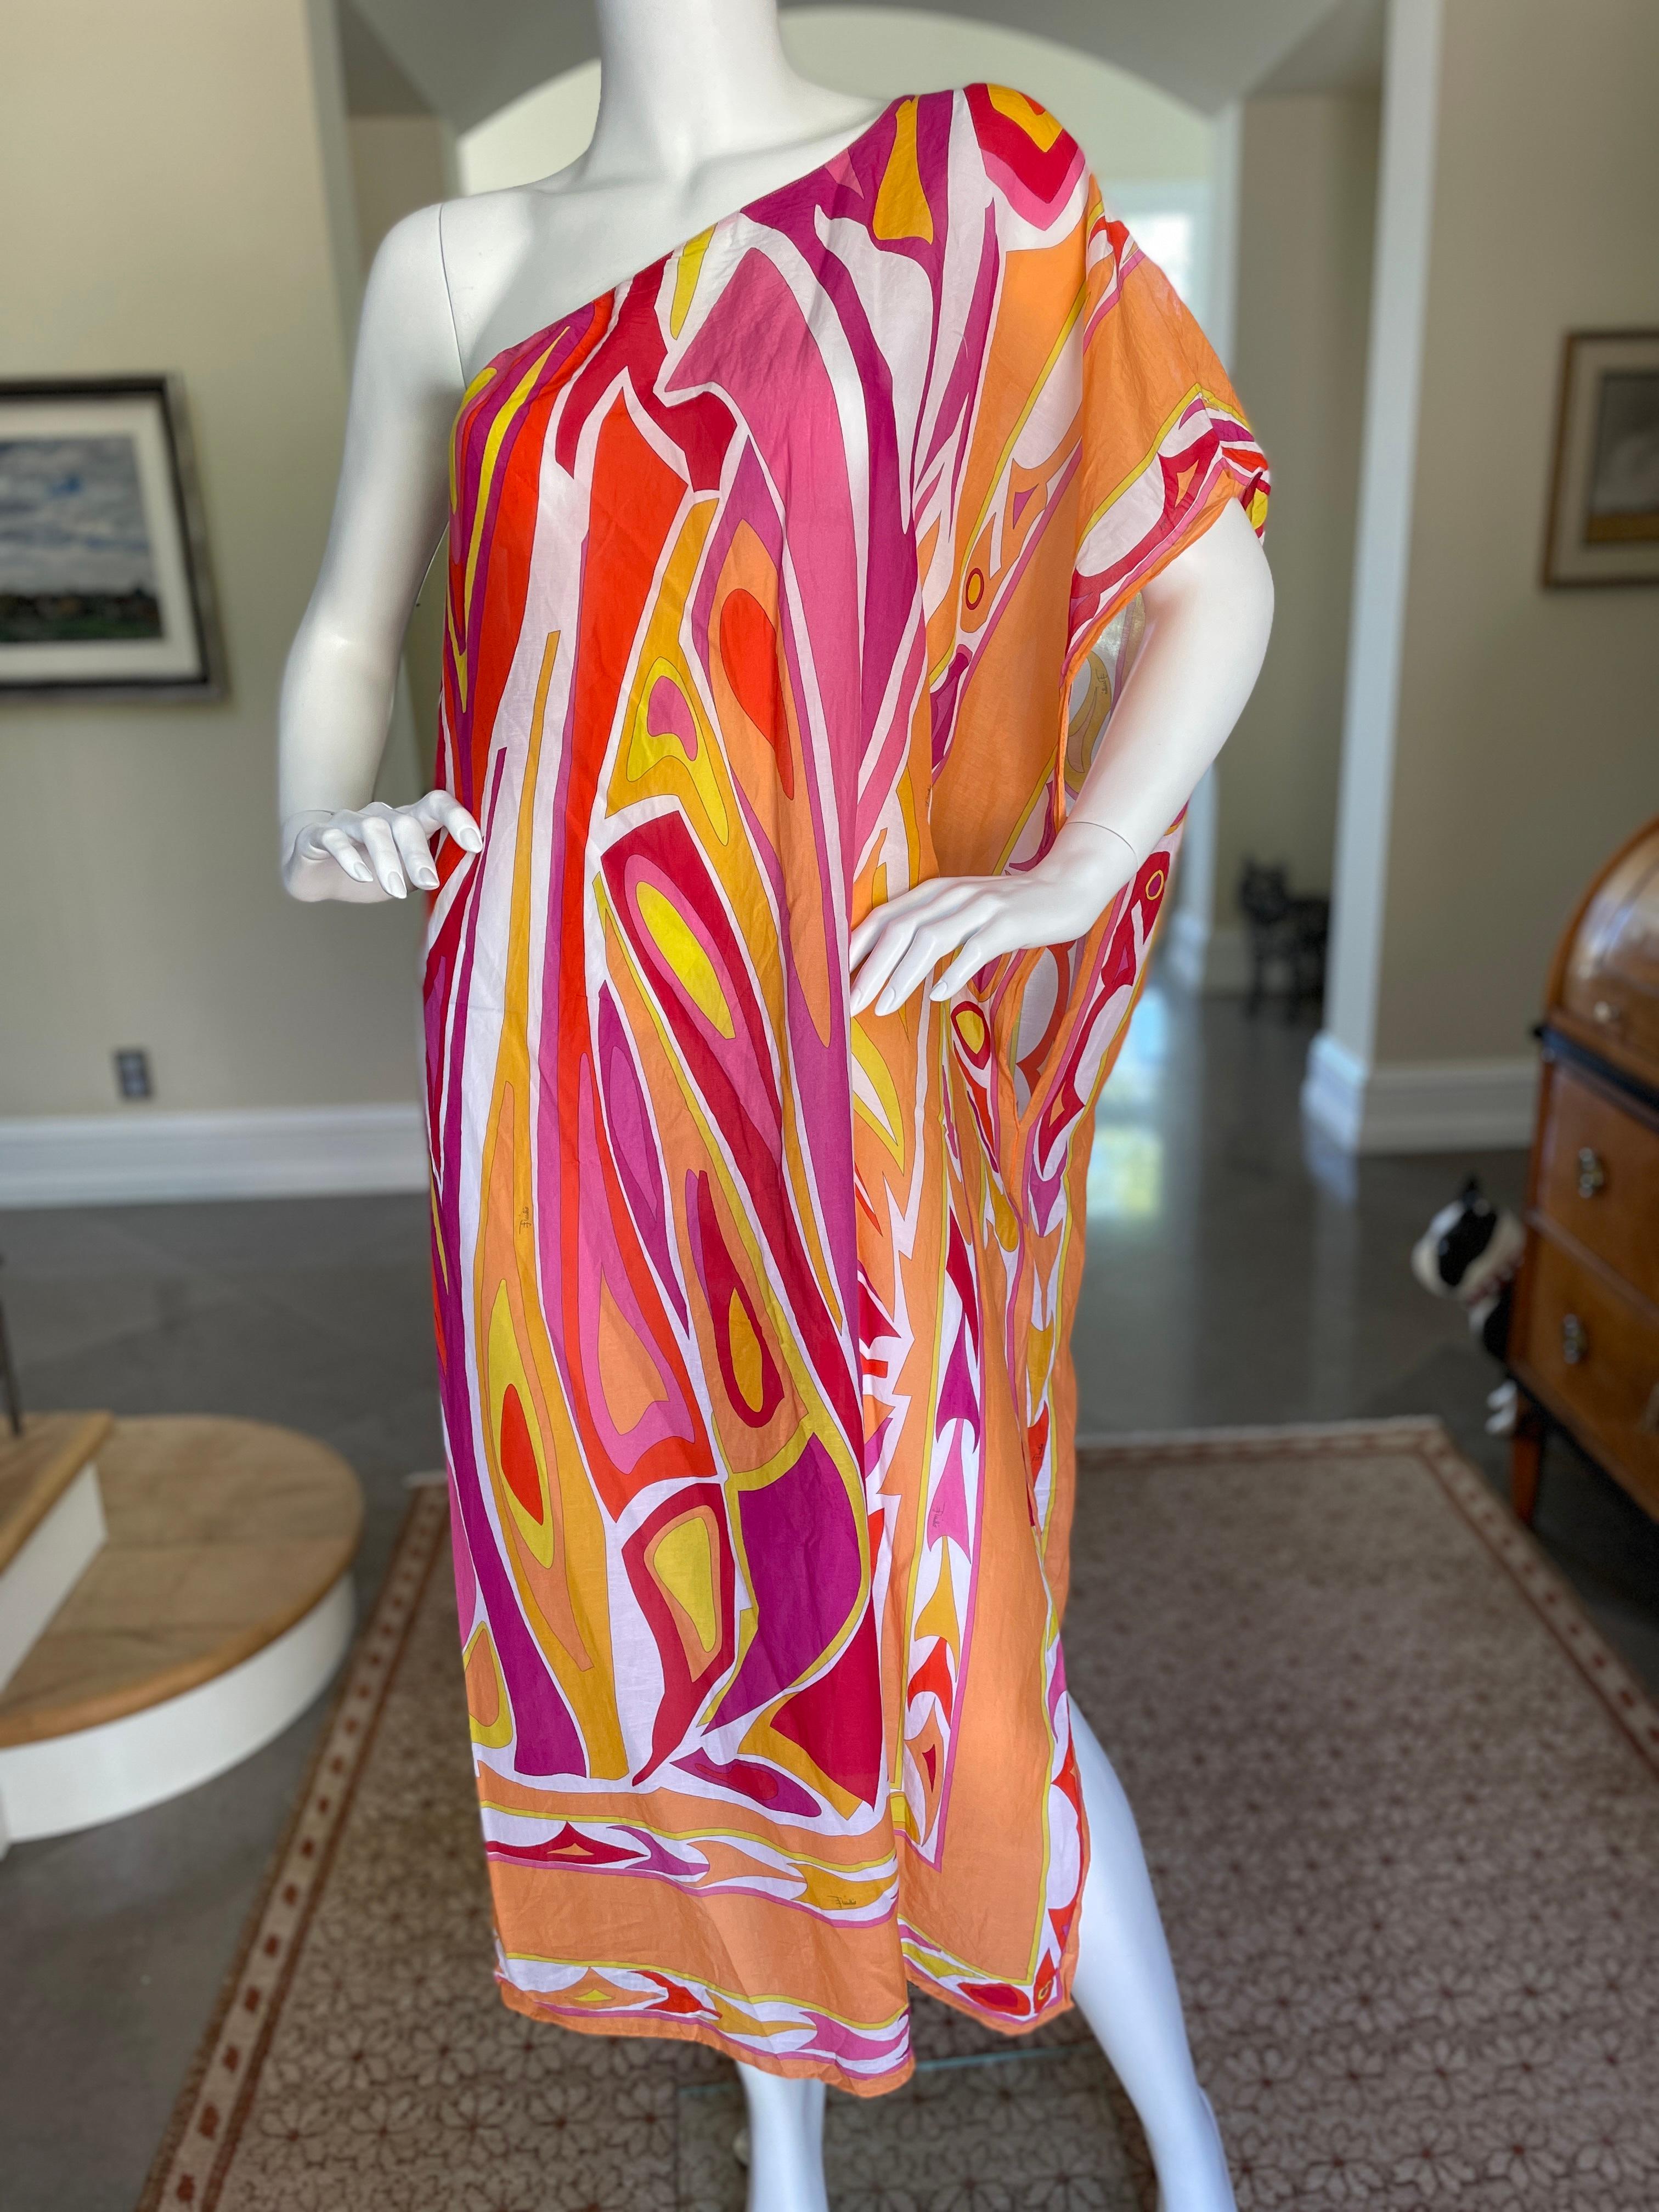 Emilio Pucci Vintage Cotton Silk Blend One Shoulder Caftan Beach Cover
So pretty , please use the zoom feature to see details
Size 12 US
 Bust 45